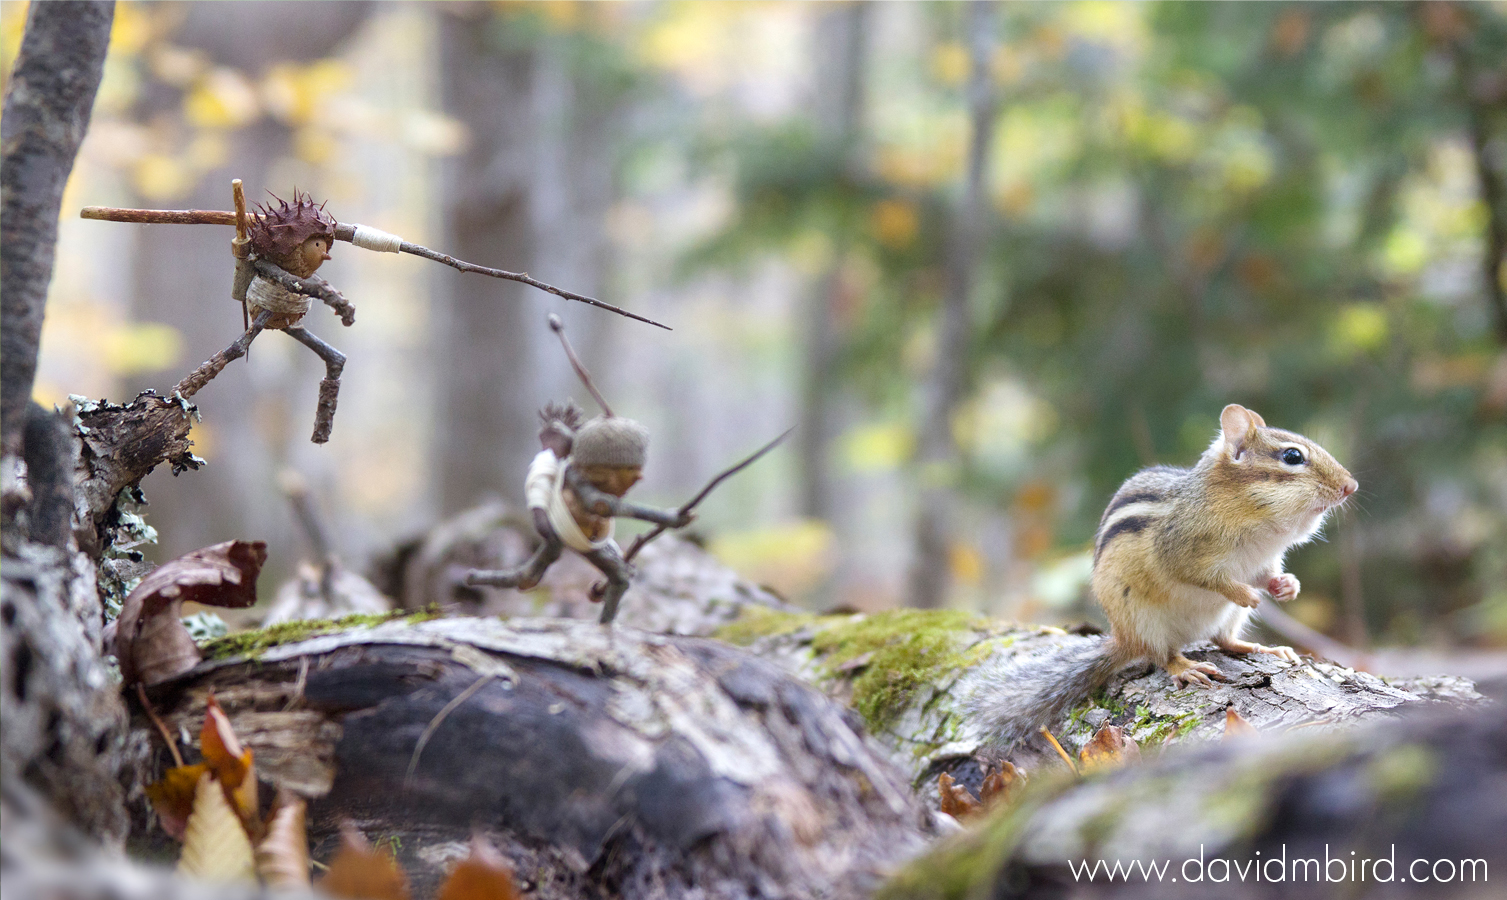 People made from acorns and holding sticks as weapon sneak up on a chipmunk from behind